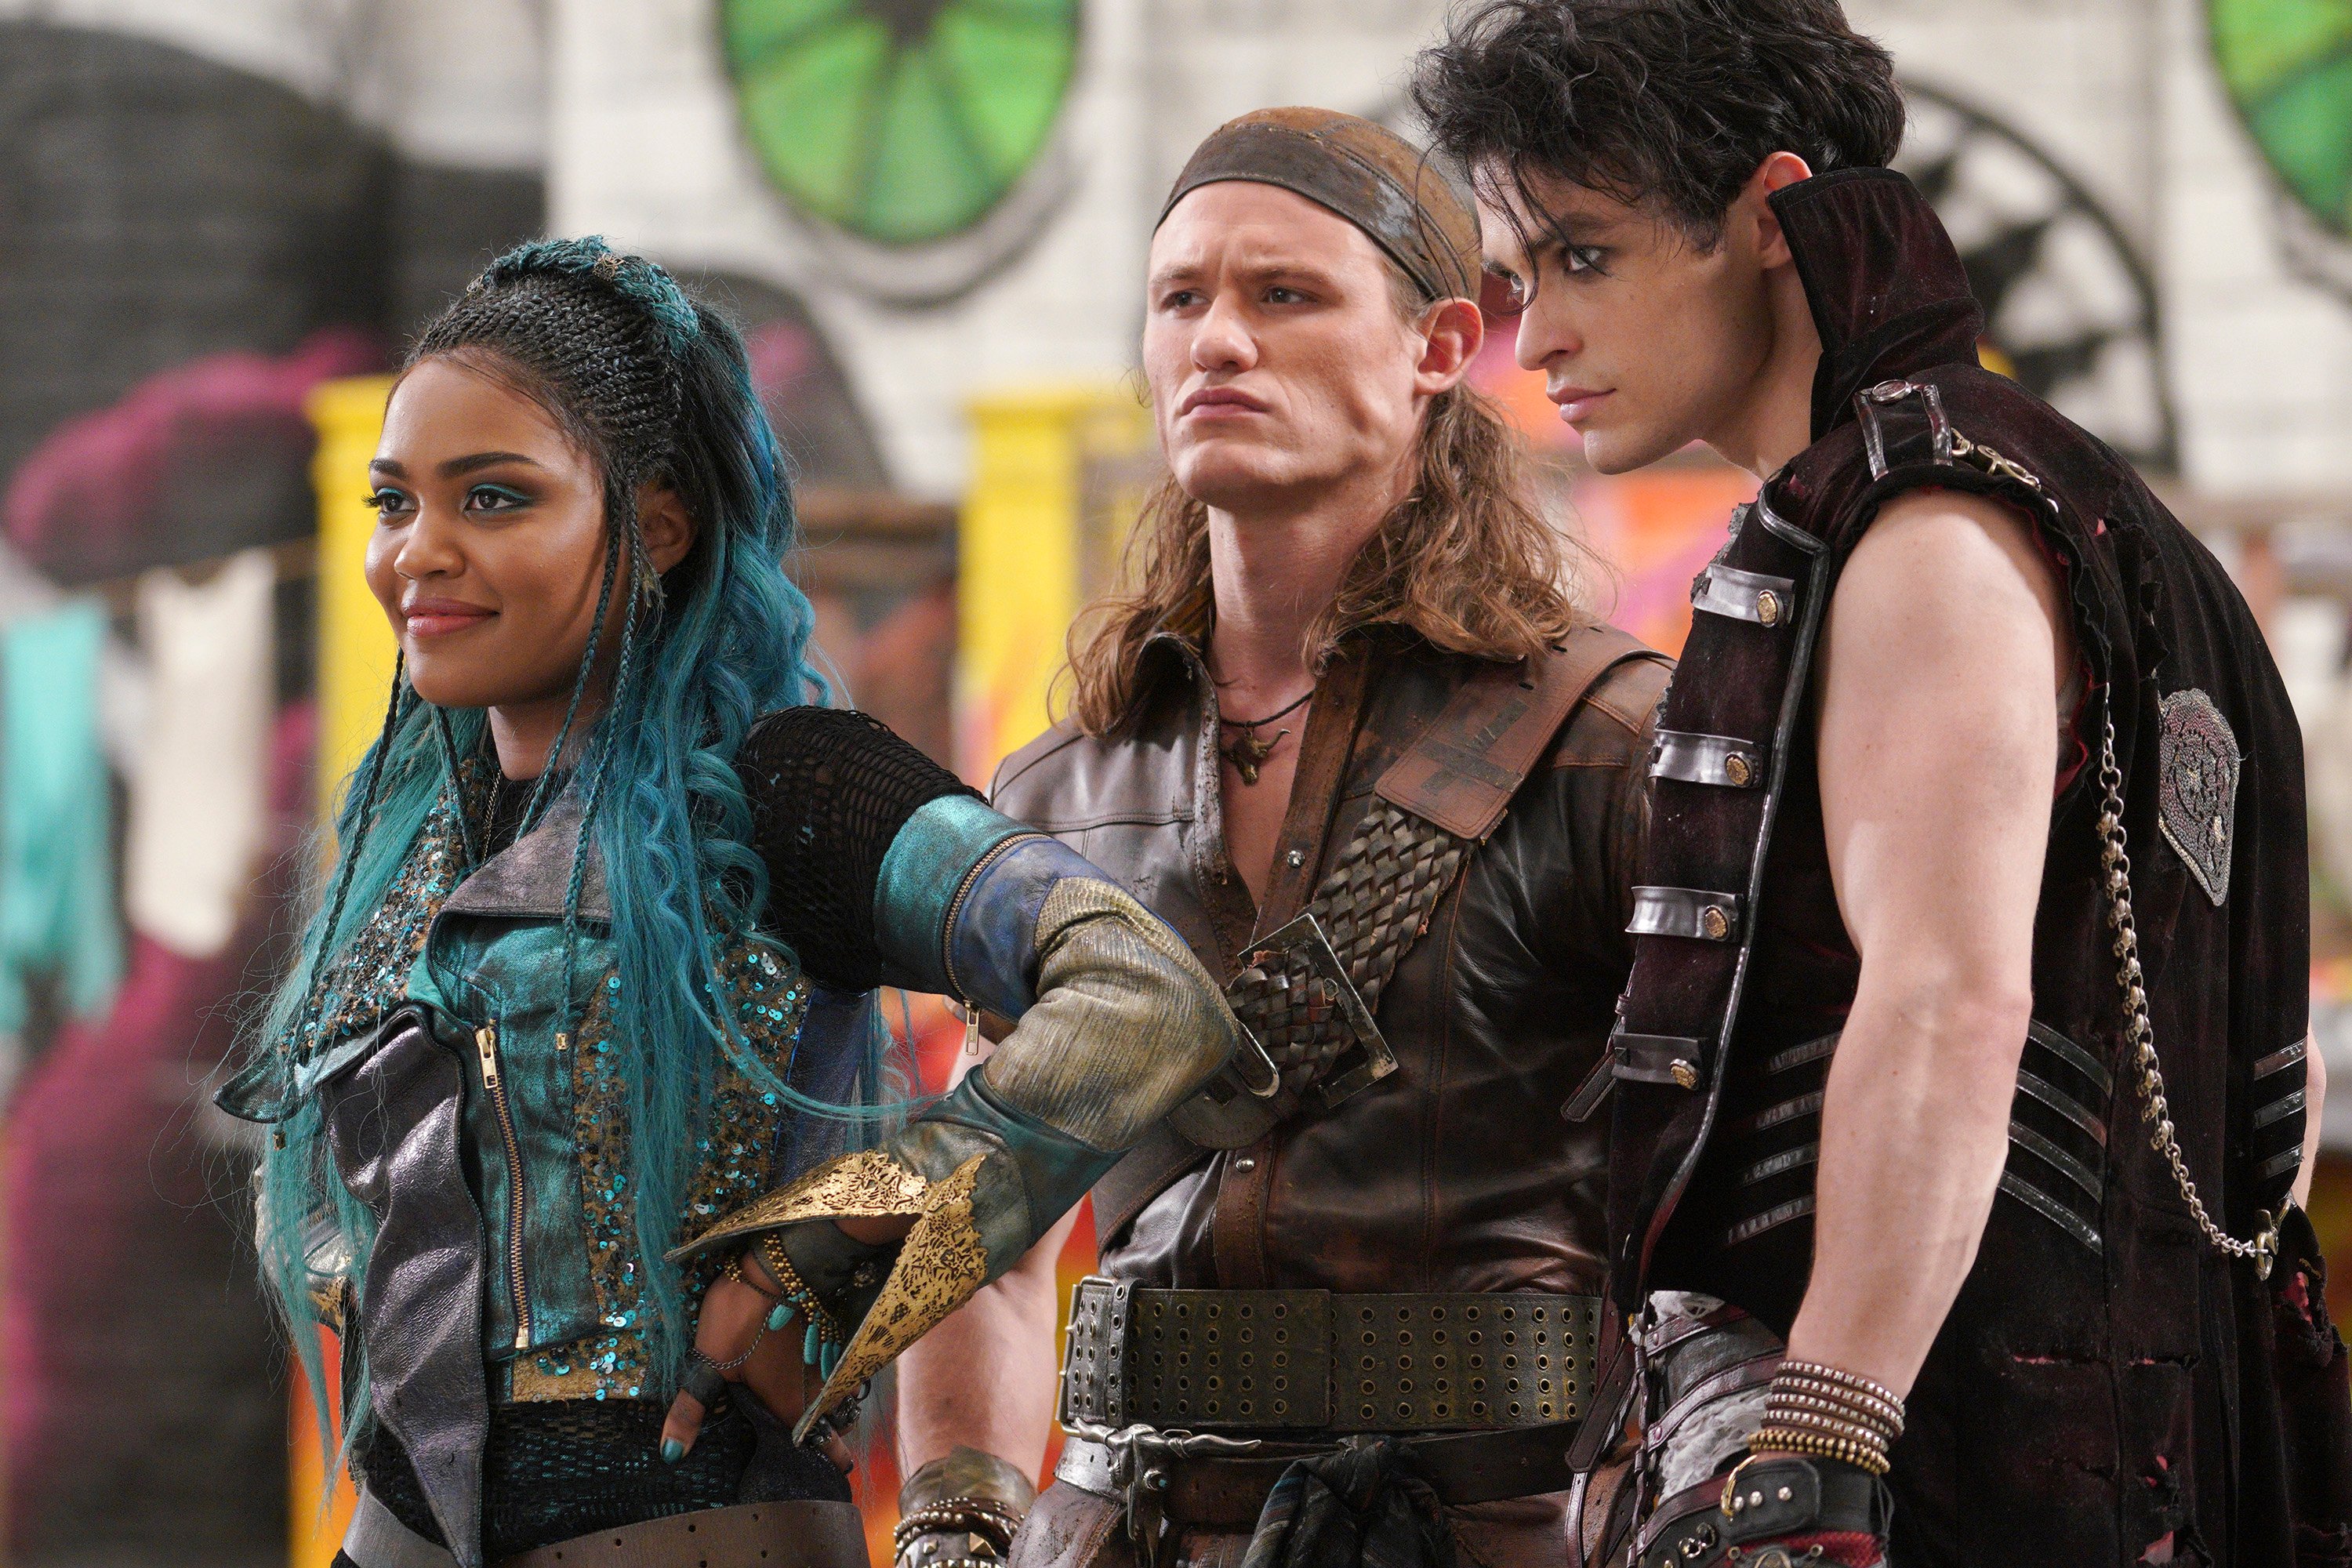 This Character From Disney Channel's 'Descendants' Didn't Have a